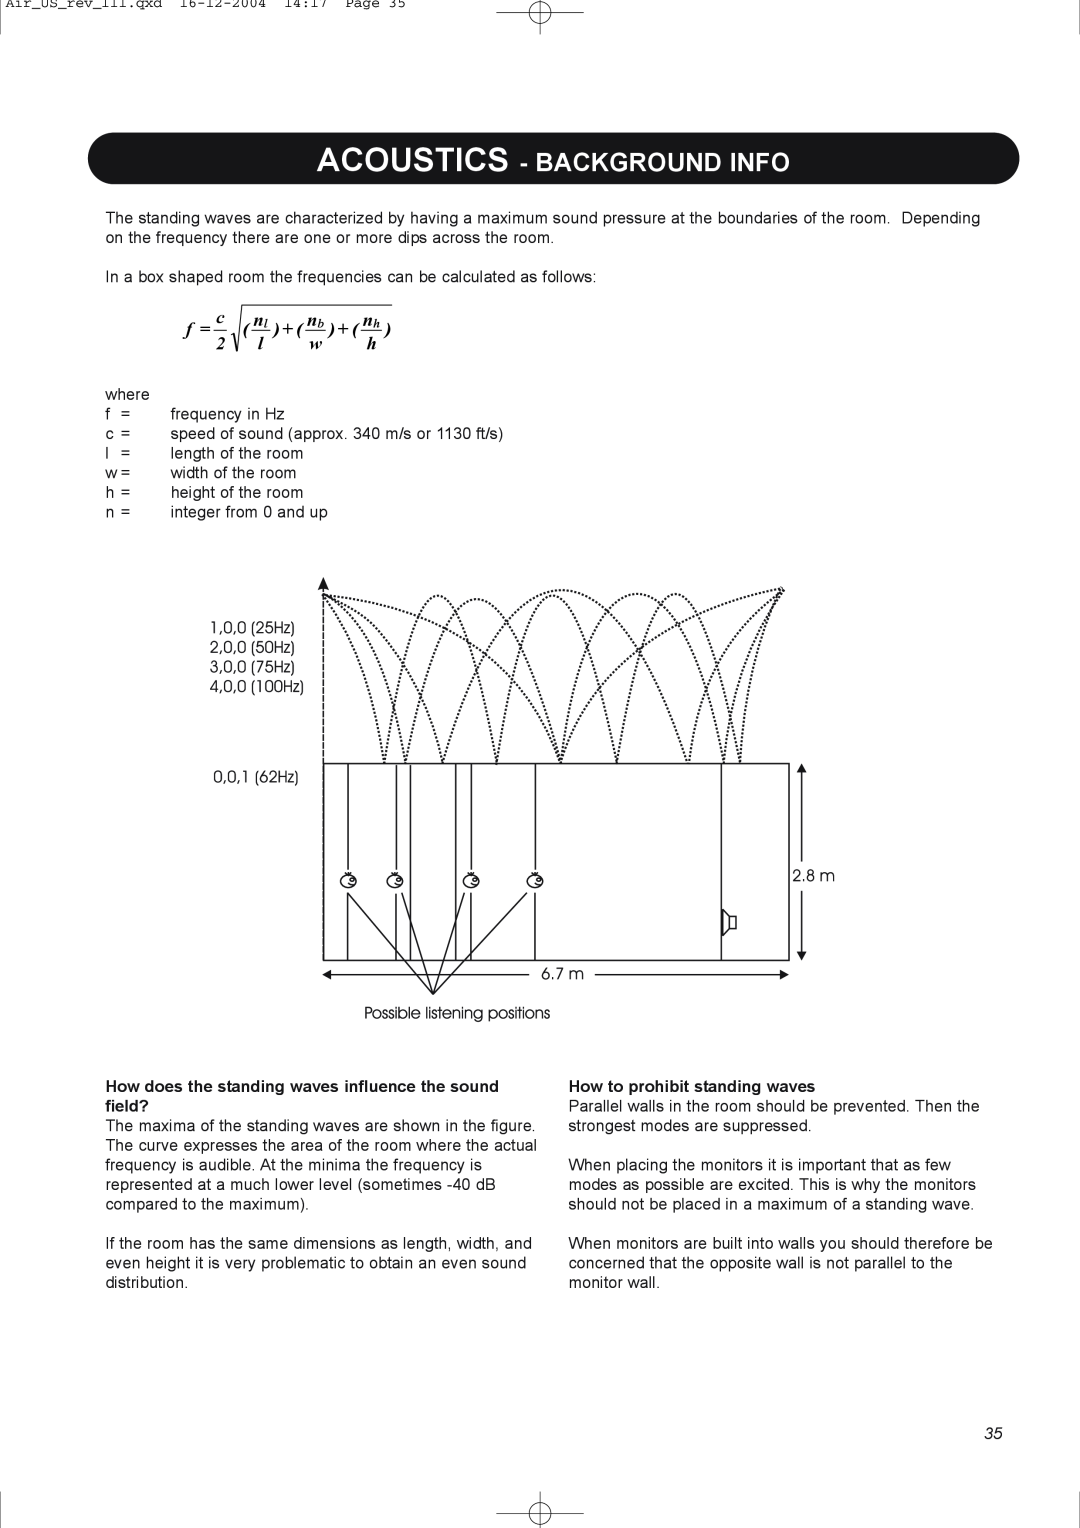 Dynaudio pmn manual Acoustics - Background Info, f = c, + nb, + nh, How to prohibit standing waves 